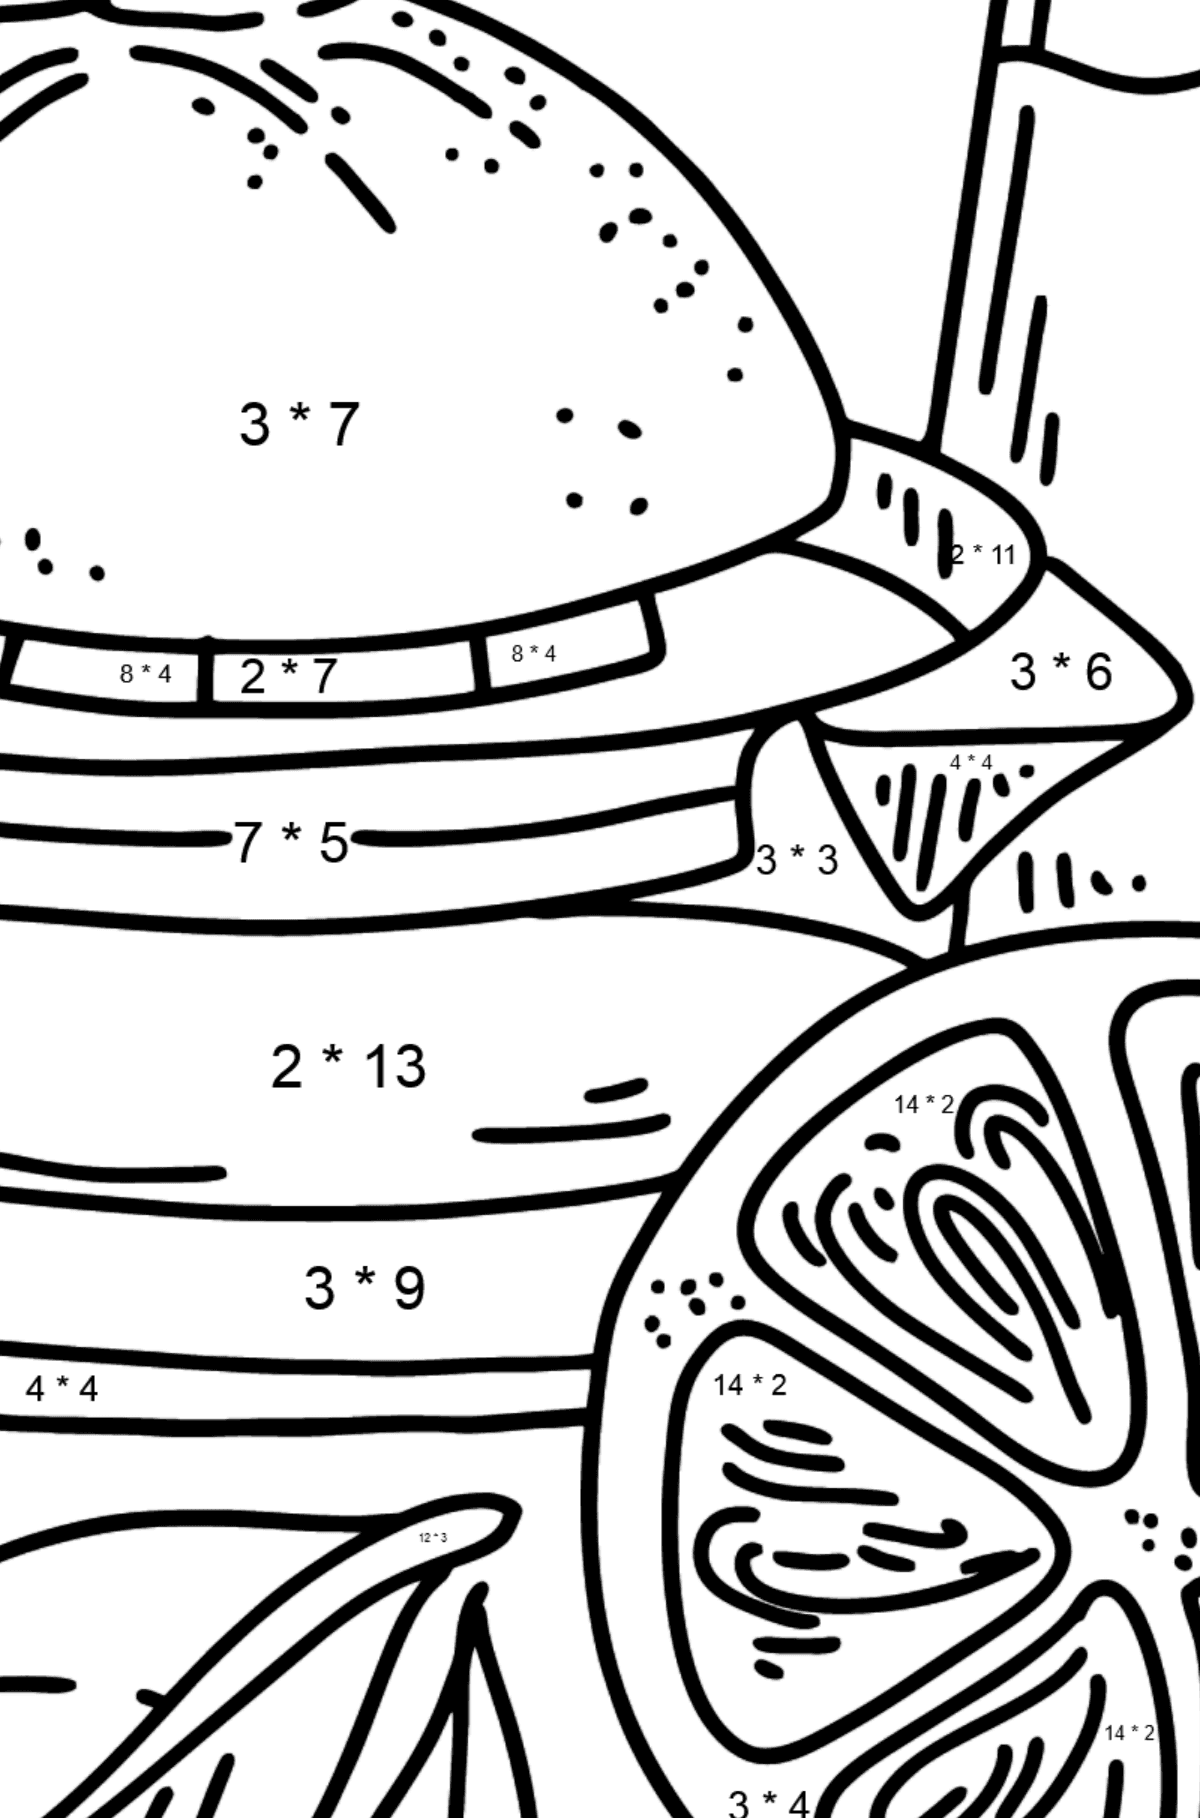 Orange Juice coloring page - Math Coloring - Multiplication for Kids